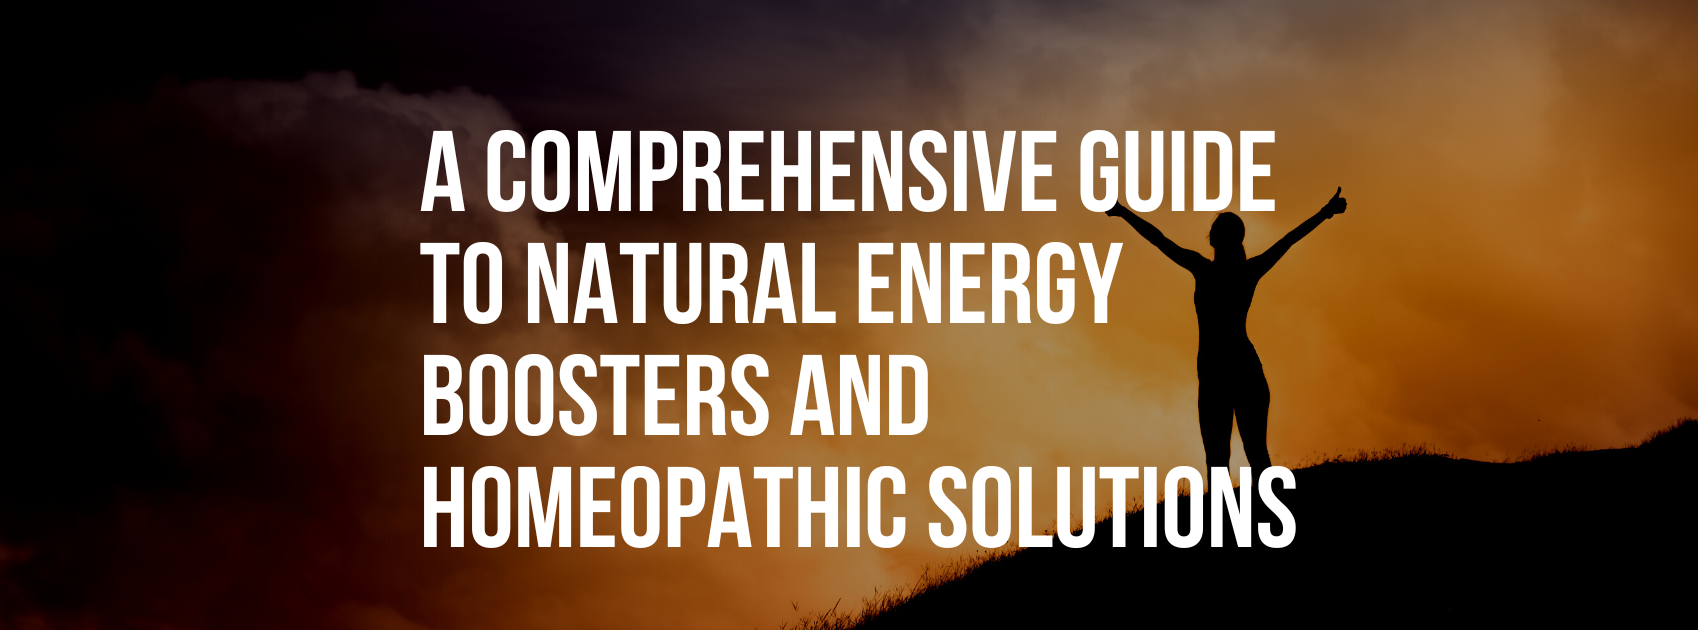 Natural Energy Boosters: A Comprehensive Guide to Natural Energy Boosters and Homeopathic Solutions for Fatigue